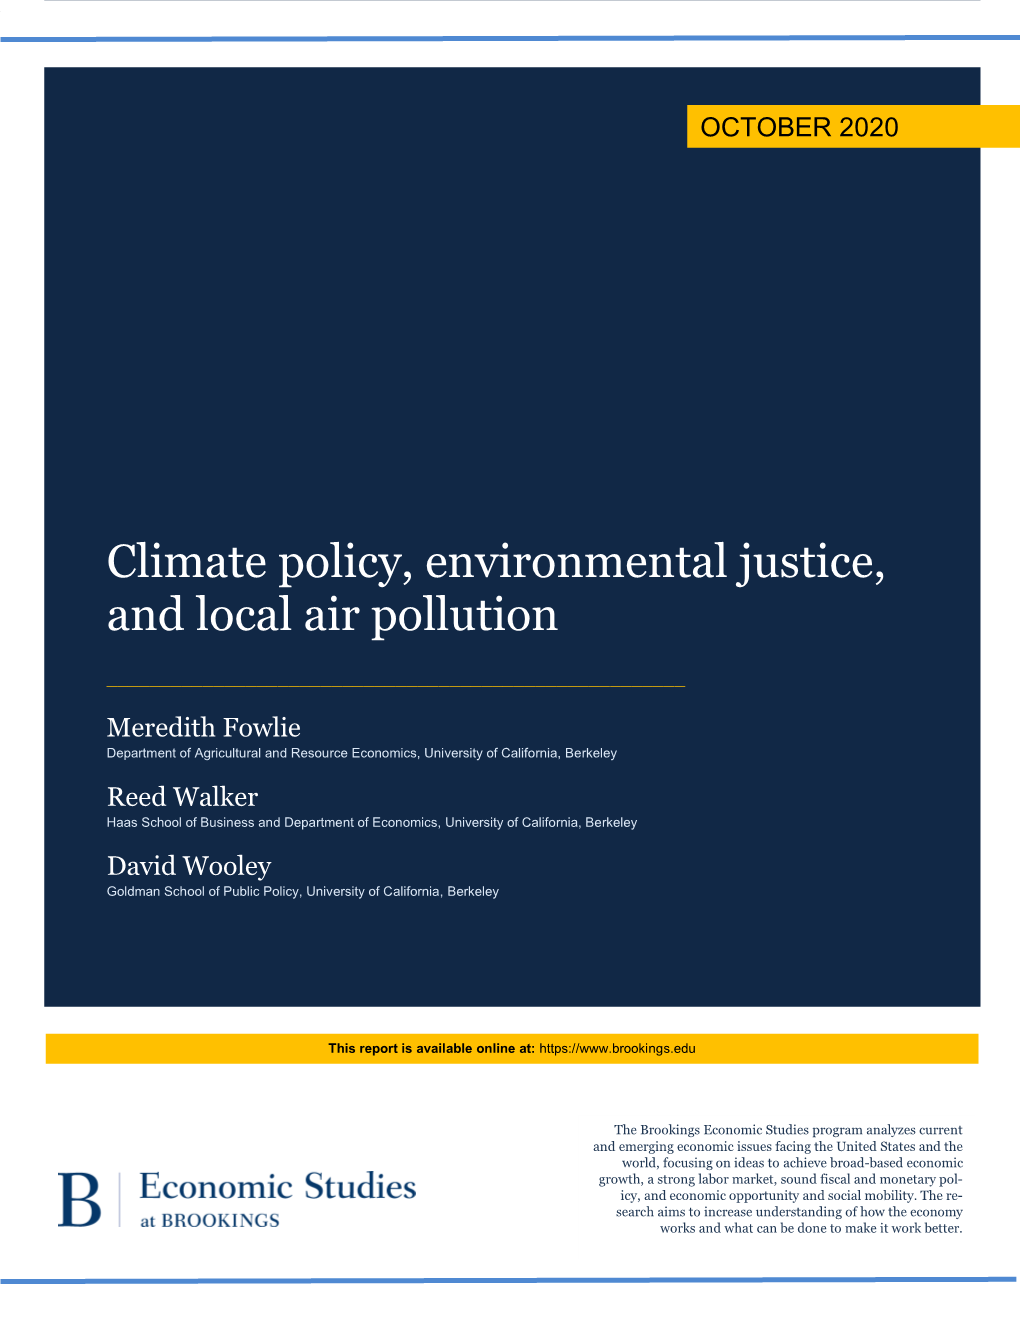 Climate Policy, Environmental Justice, and Local Air Pollution